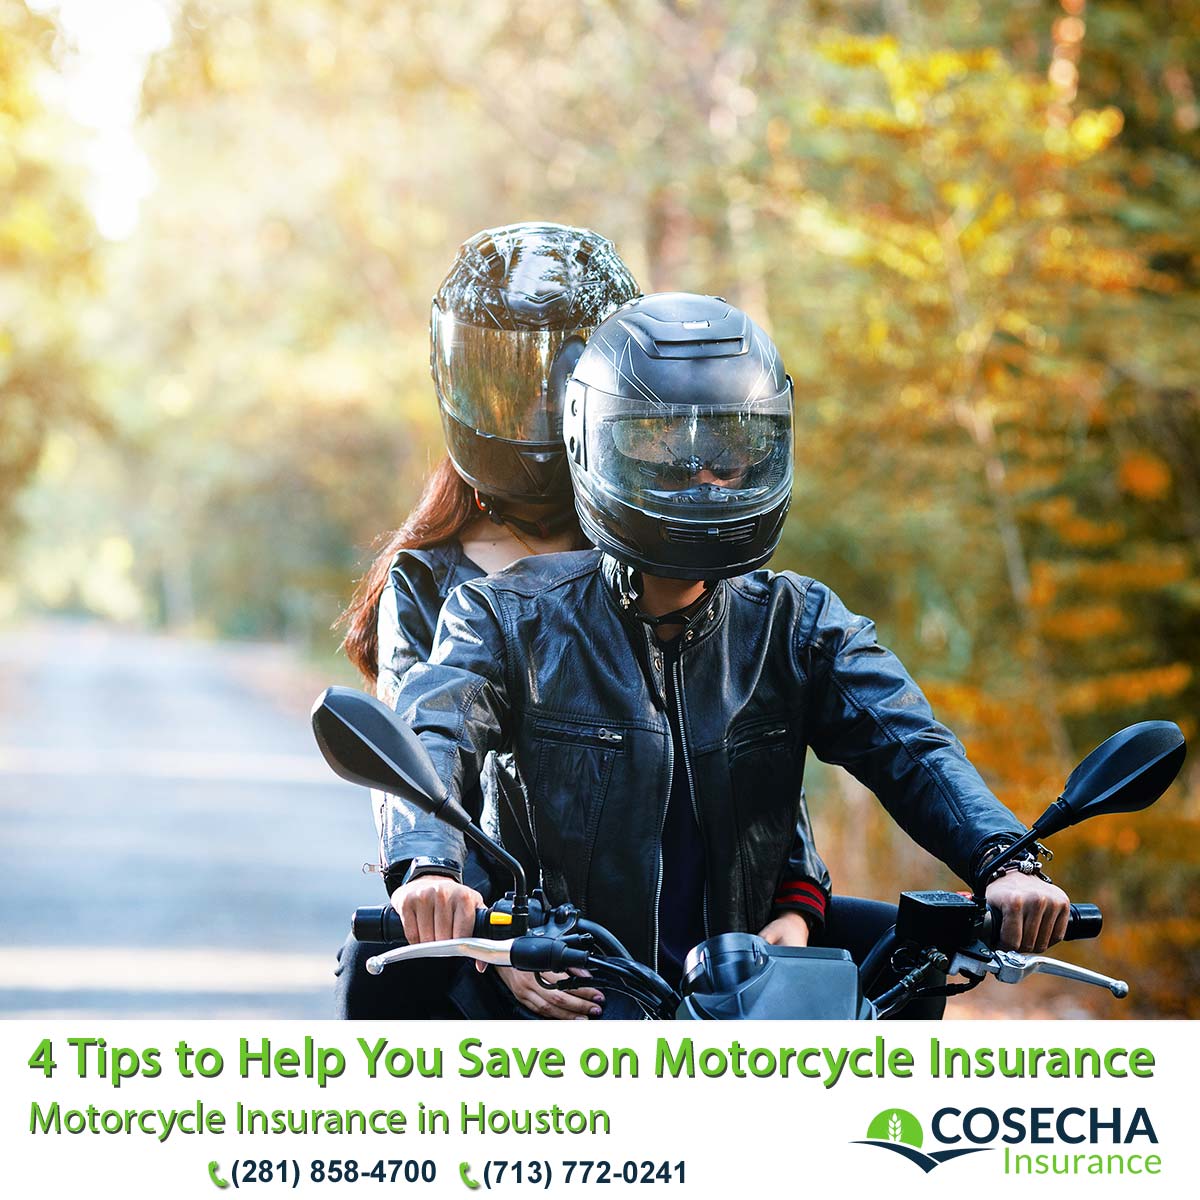 19 4 Tips to Help You Save on Motorcycle Insurance